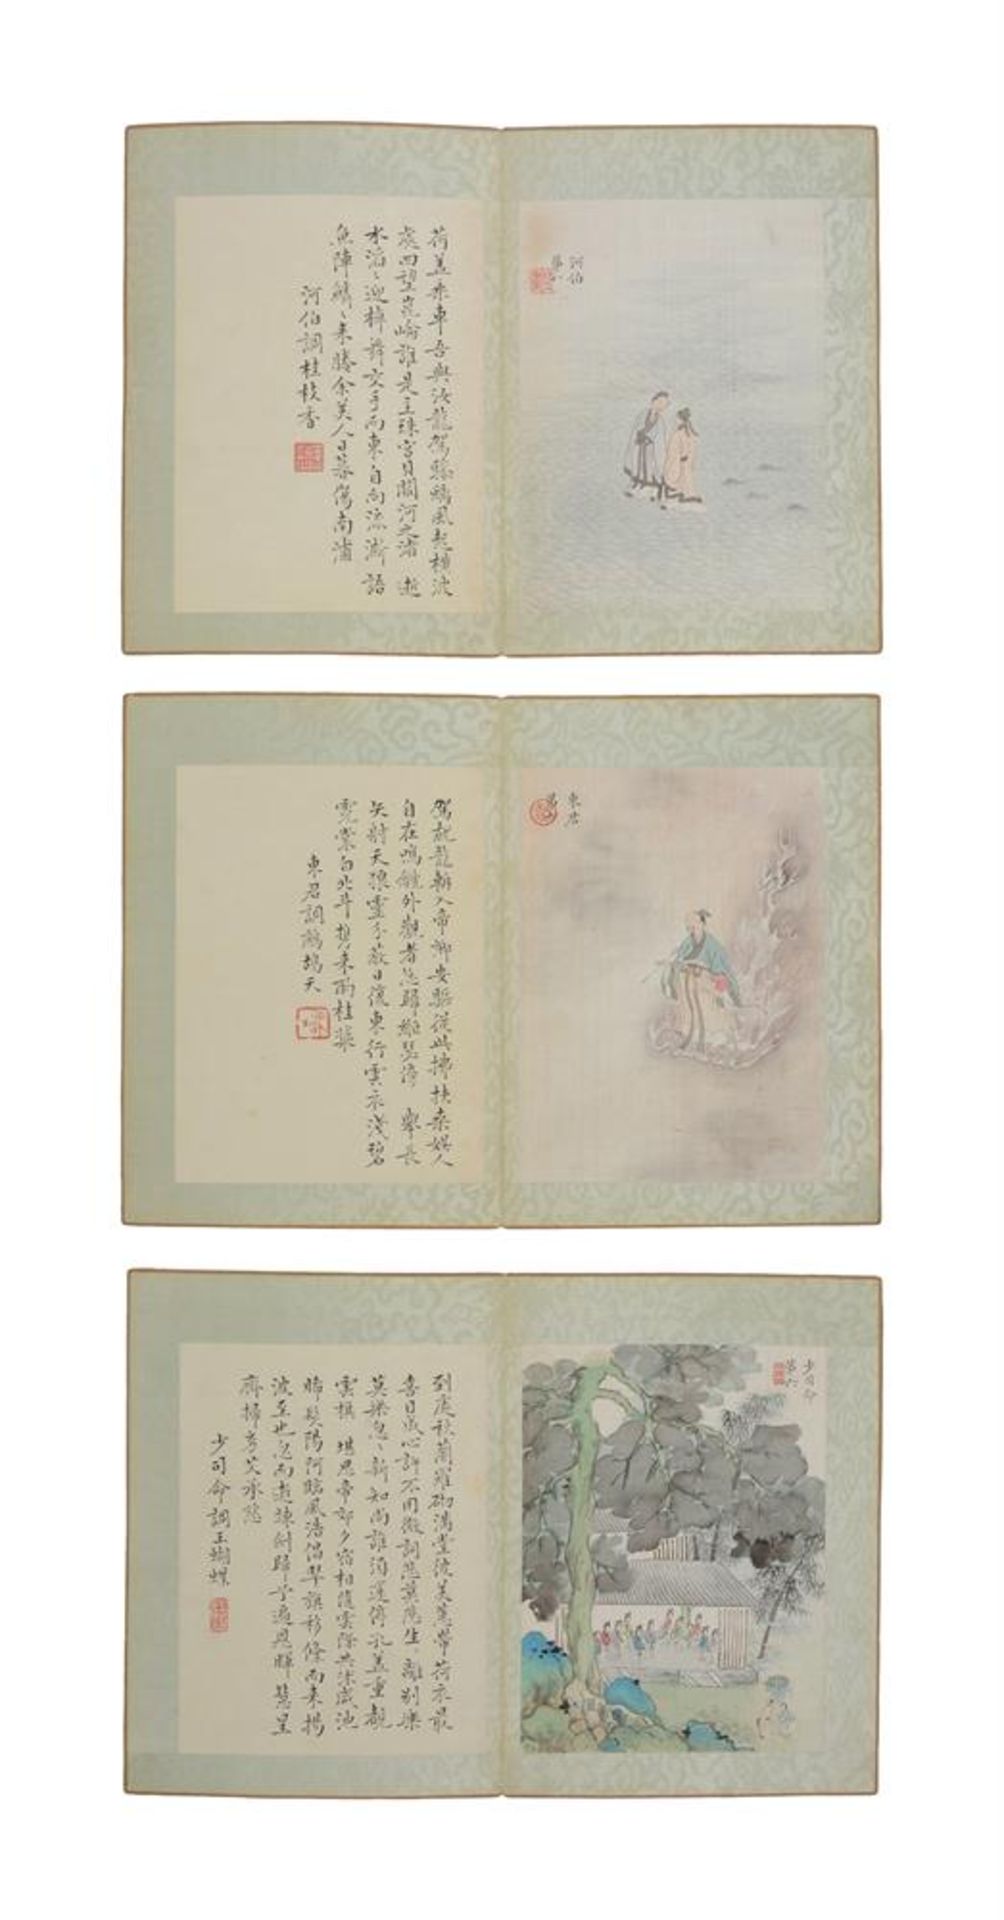 Three painted loose leaves from a Chinese painting album and one blank leaf